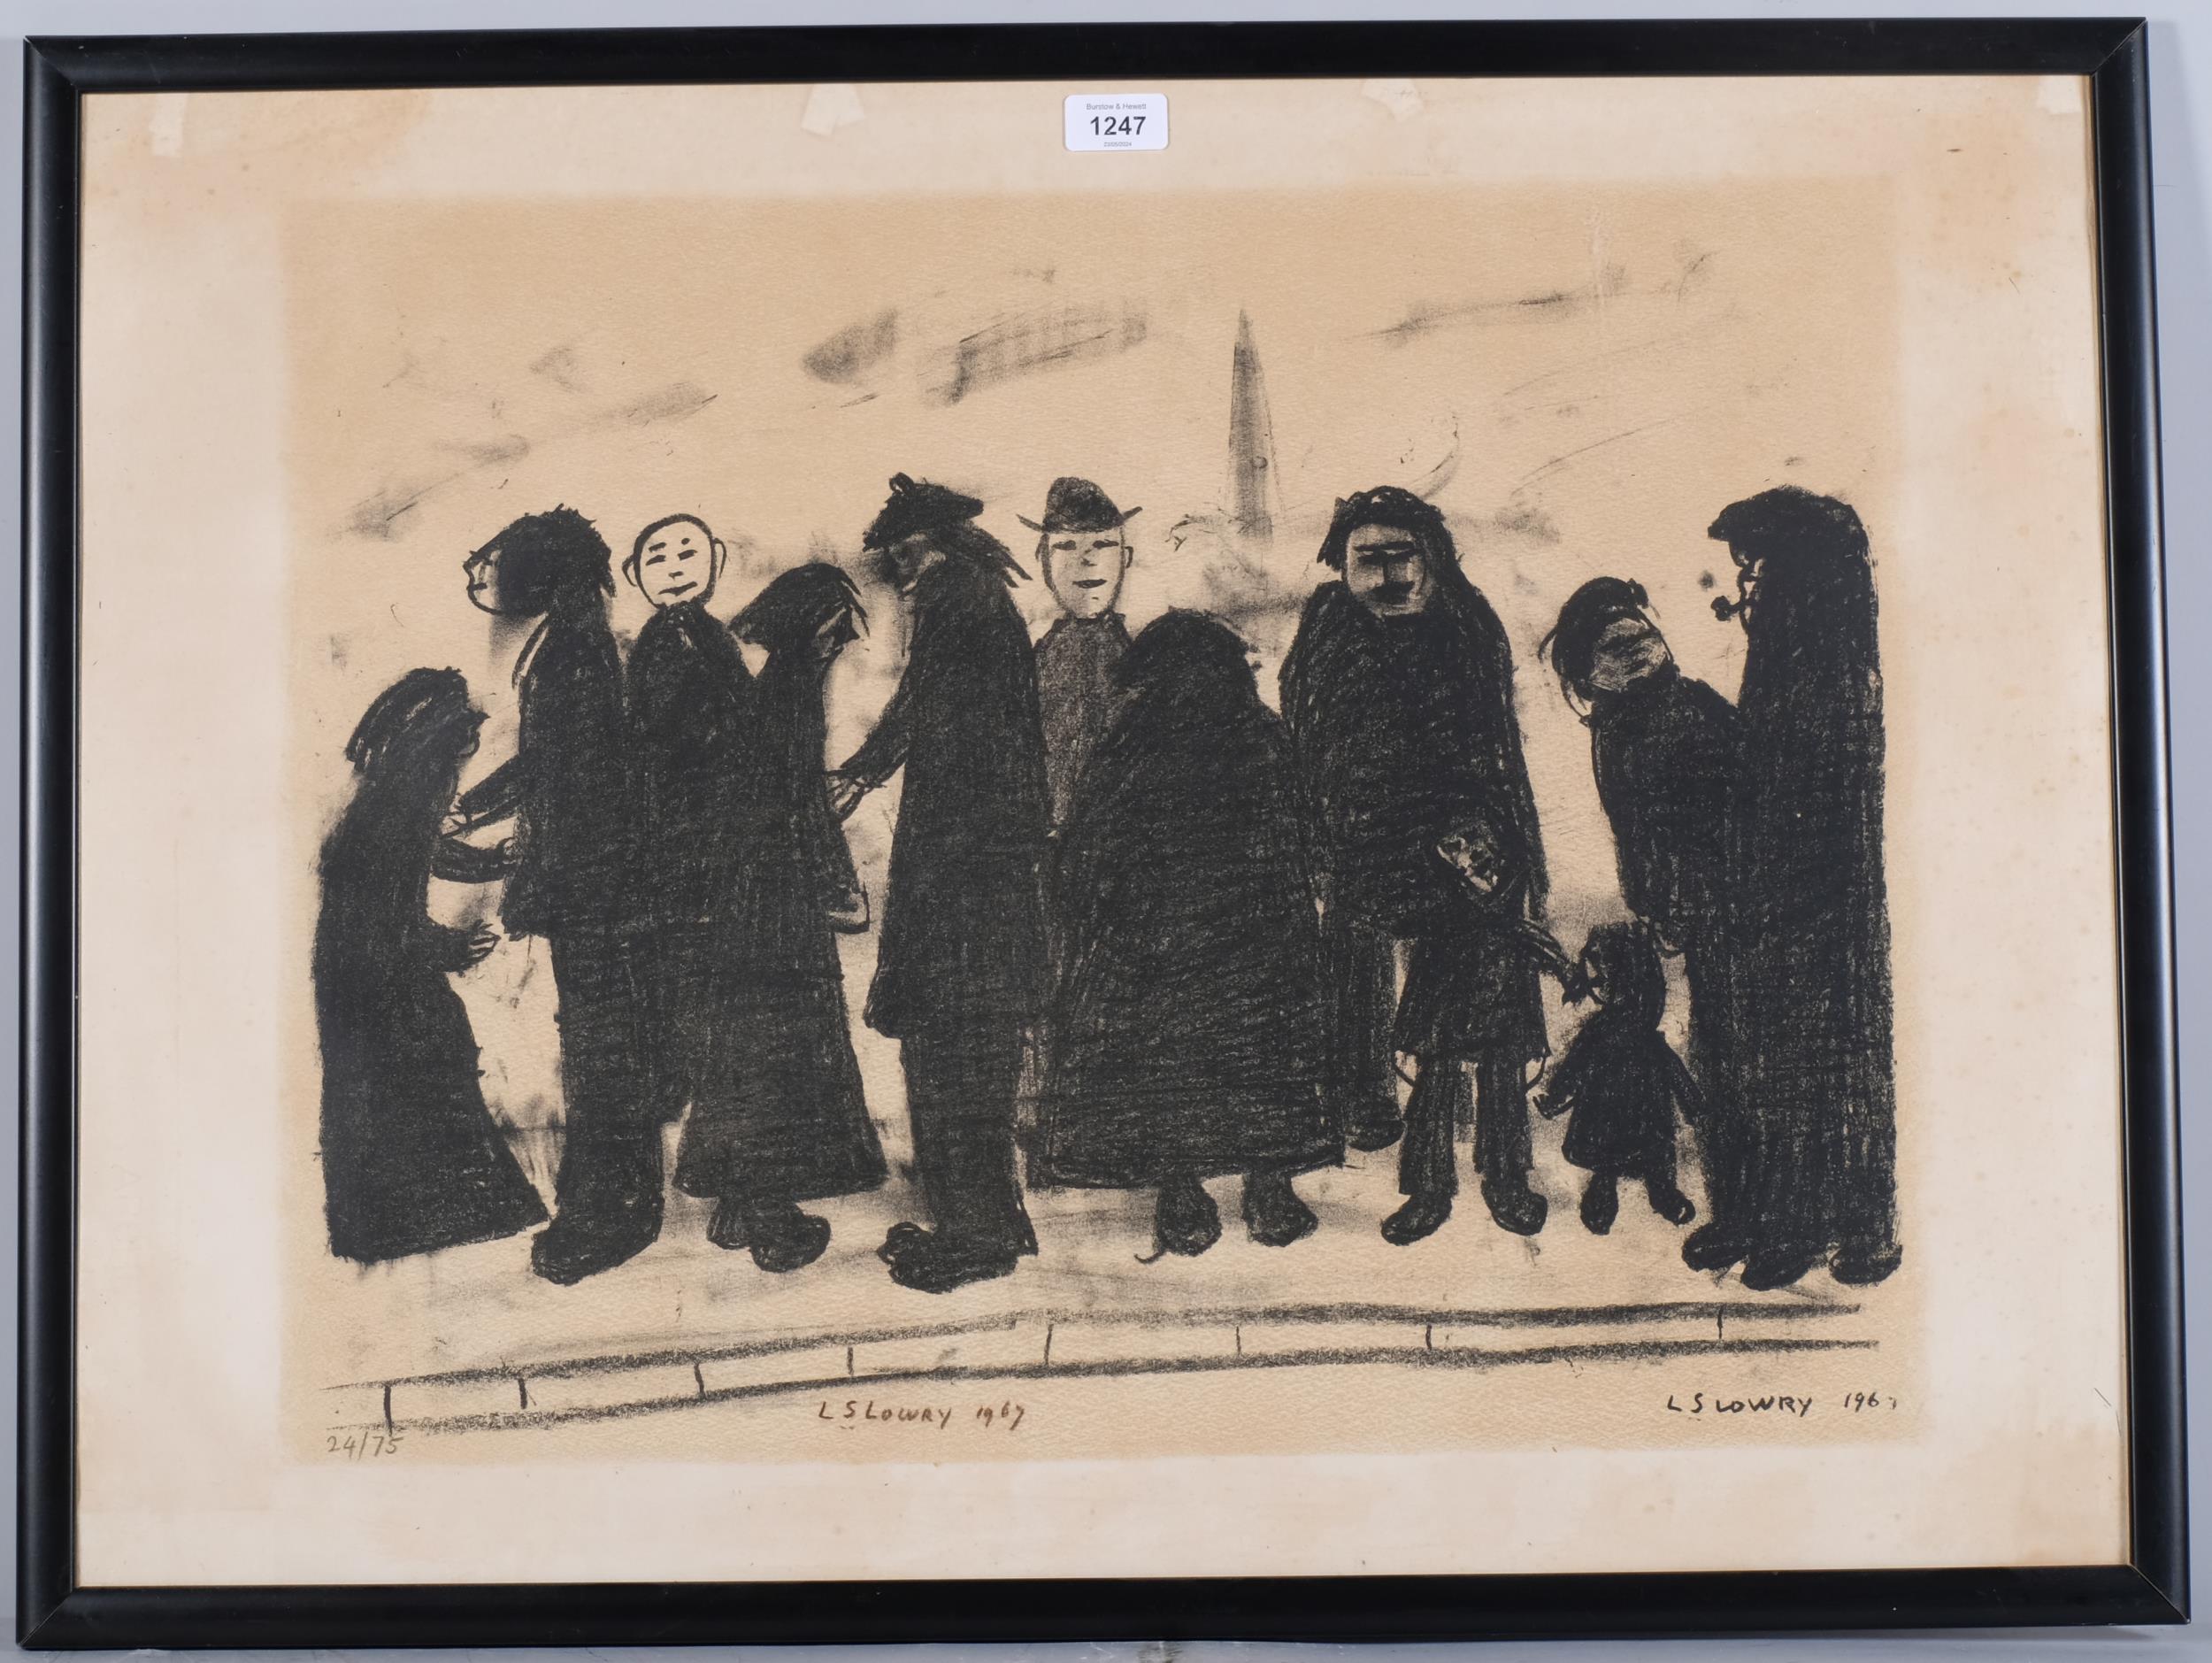 Laurence Stephen Lowry (1887 - 1976), Shapes And Sizes, 1967, lithograph, image 46cm x 60cm, no. - Image 2 of 4